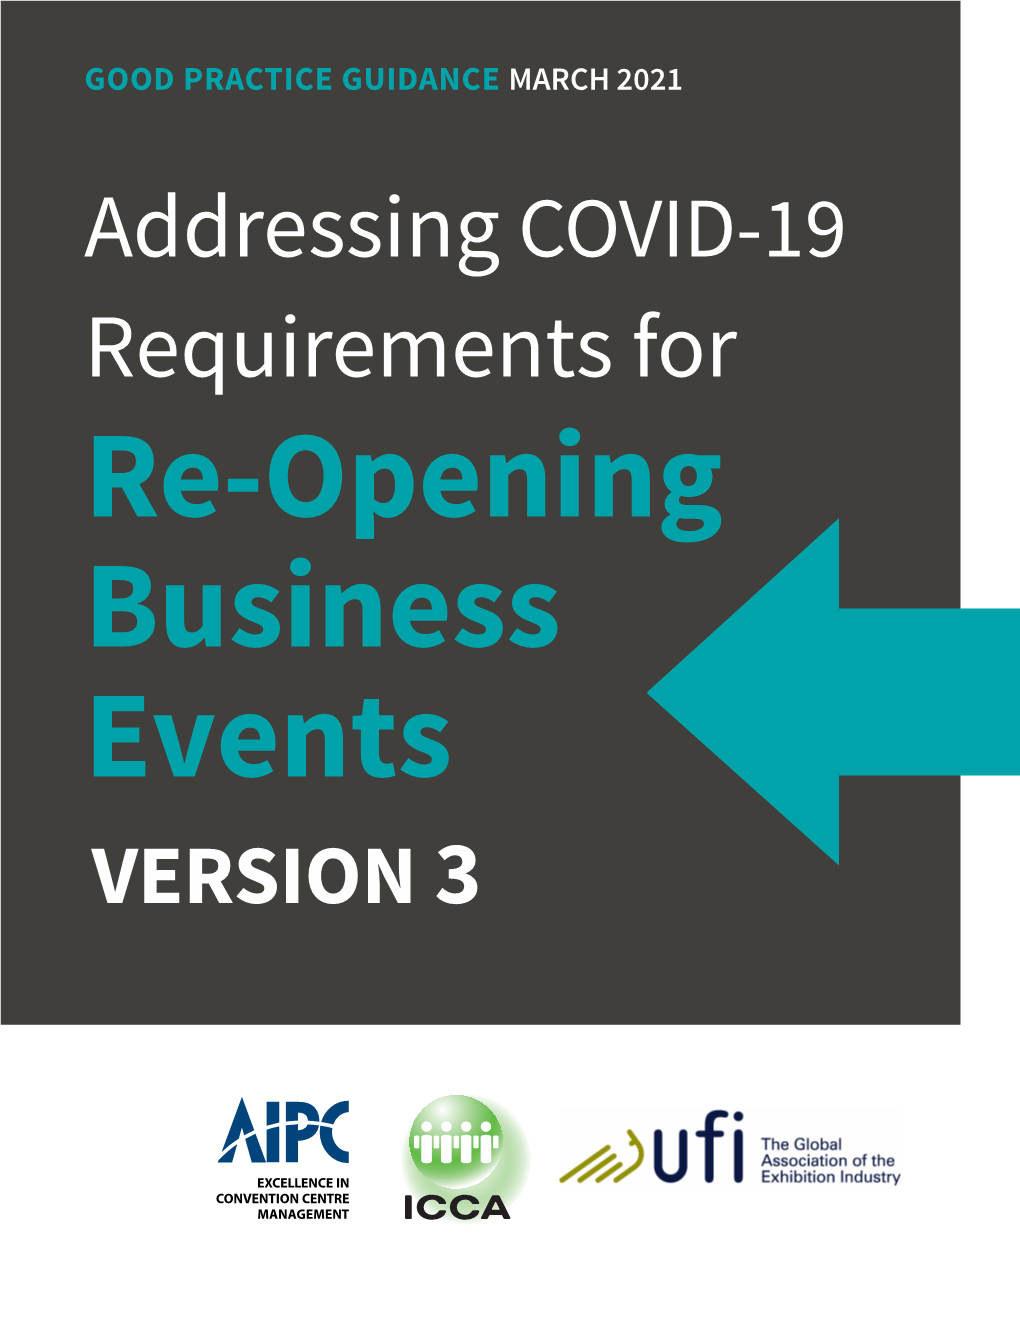 Addressing COVID-19 Requirements for Re-Opening Business Events